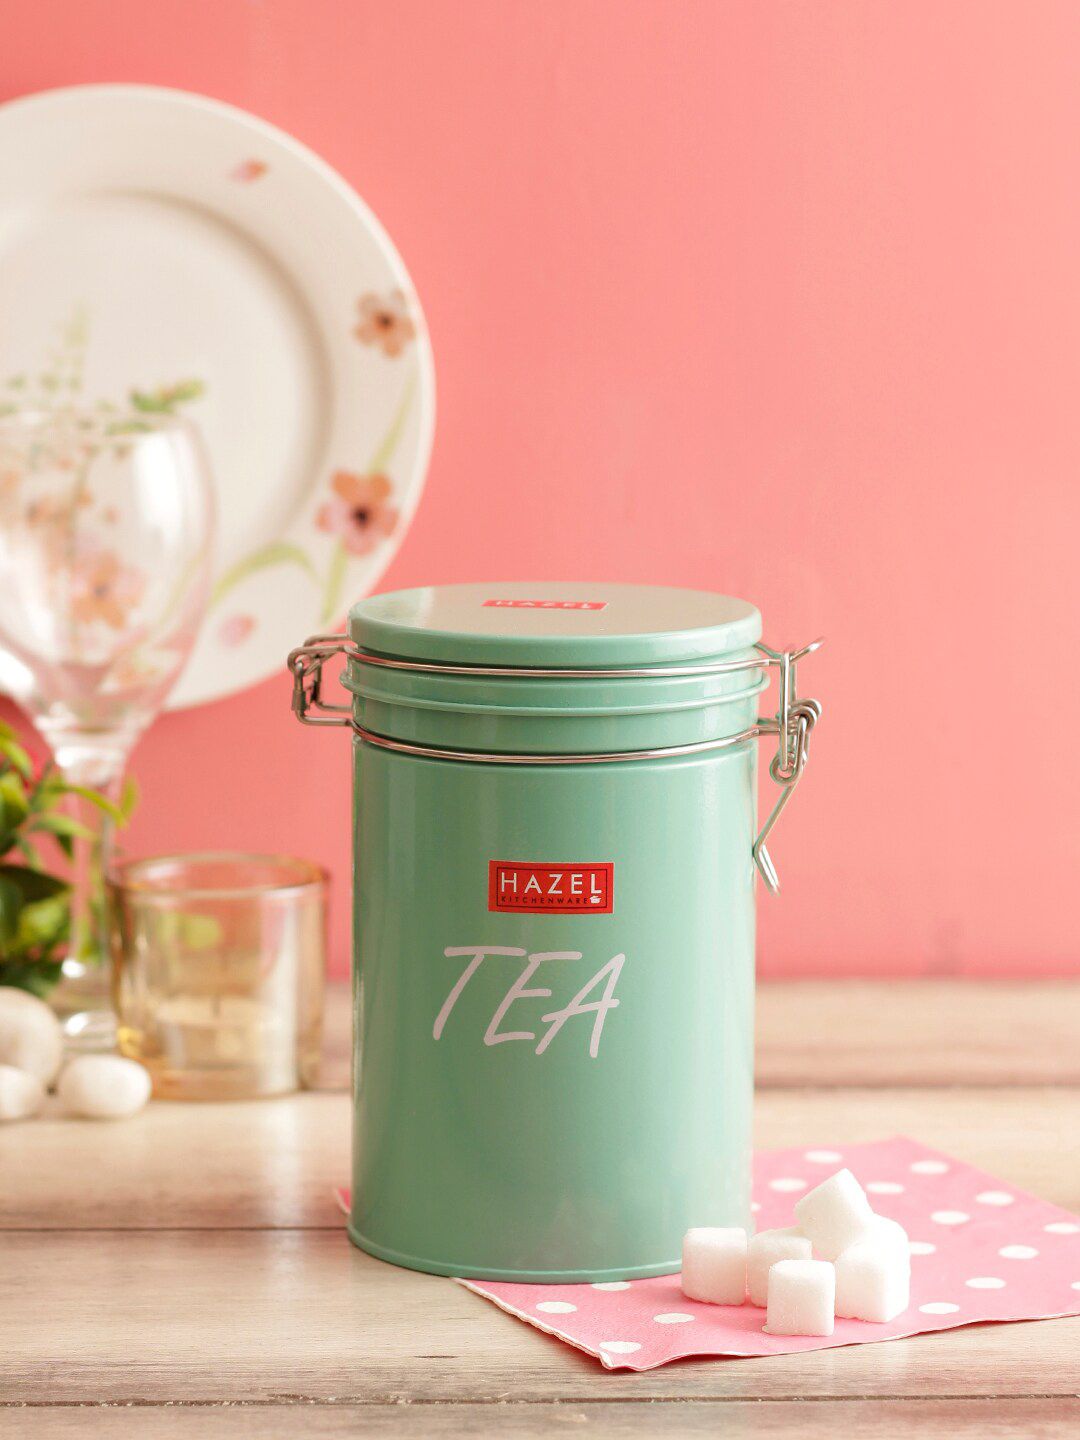 HAZEL Green Round Shaped Tea Storage Container Price in India